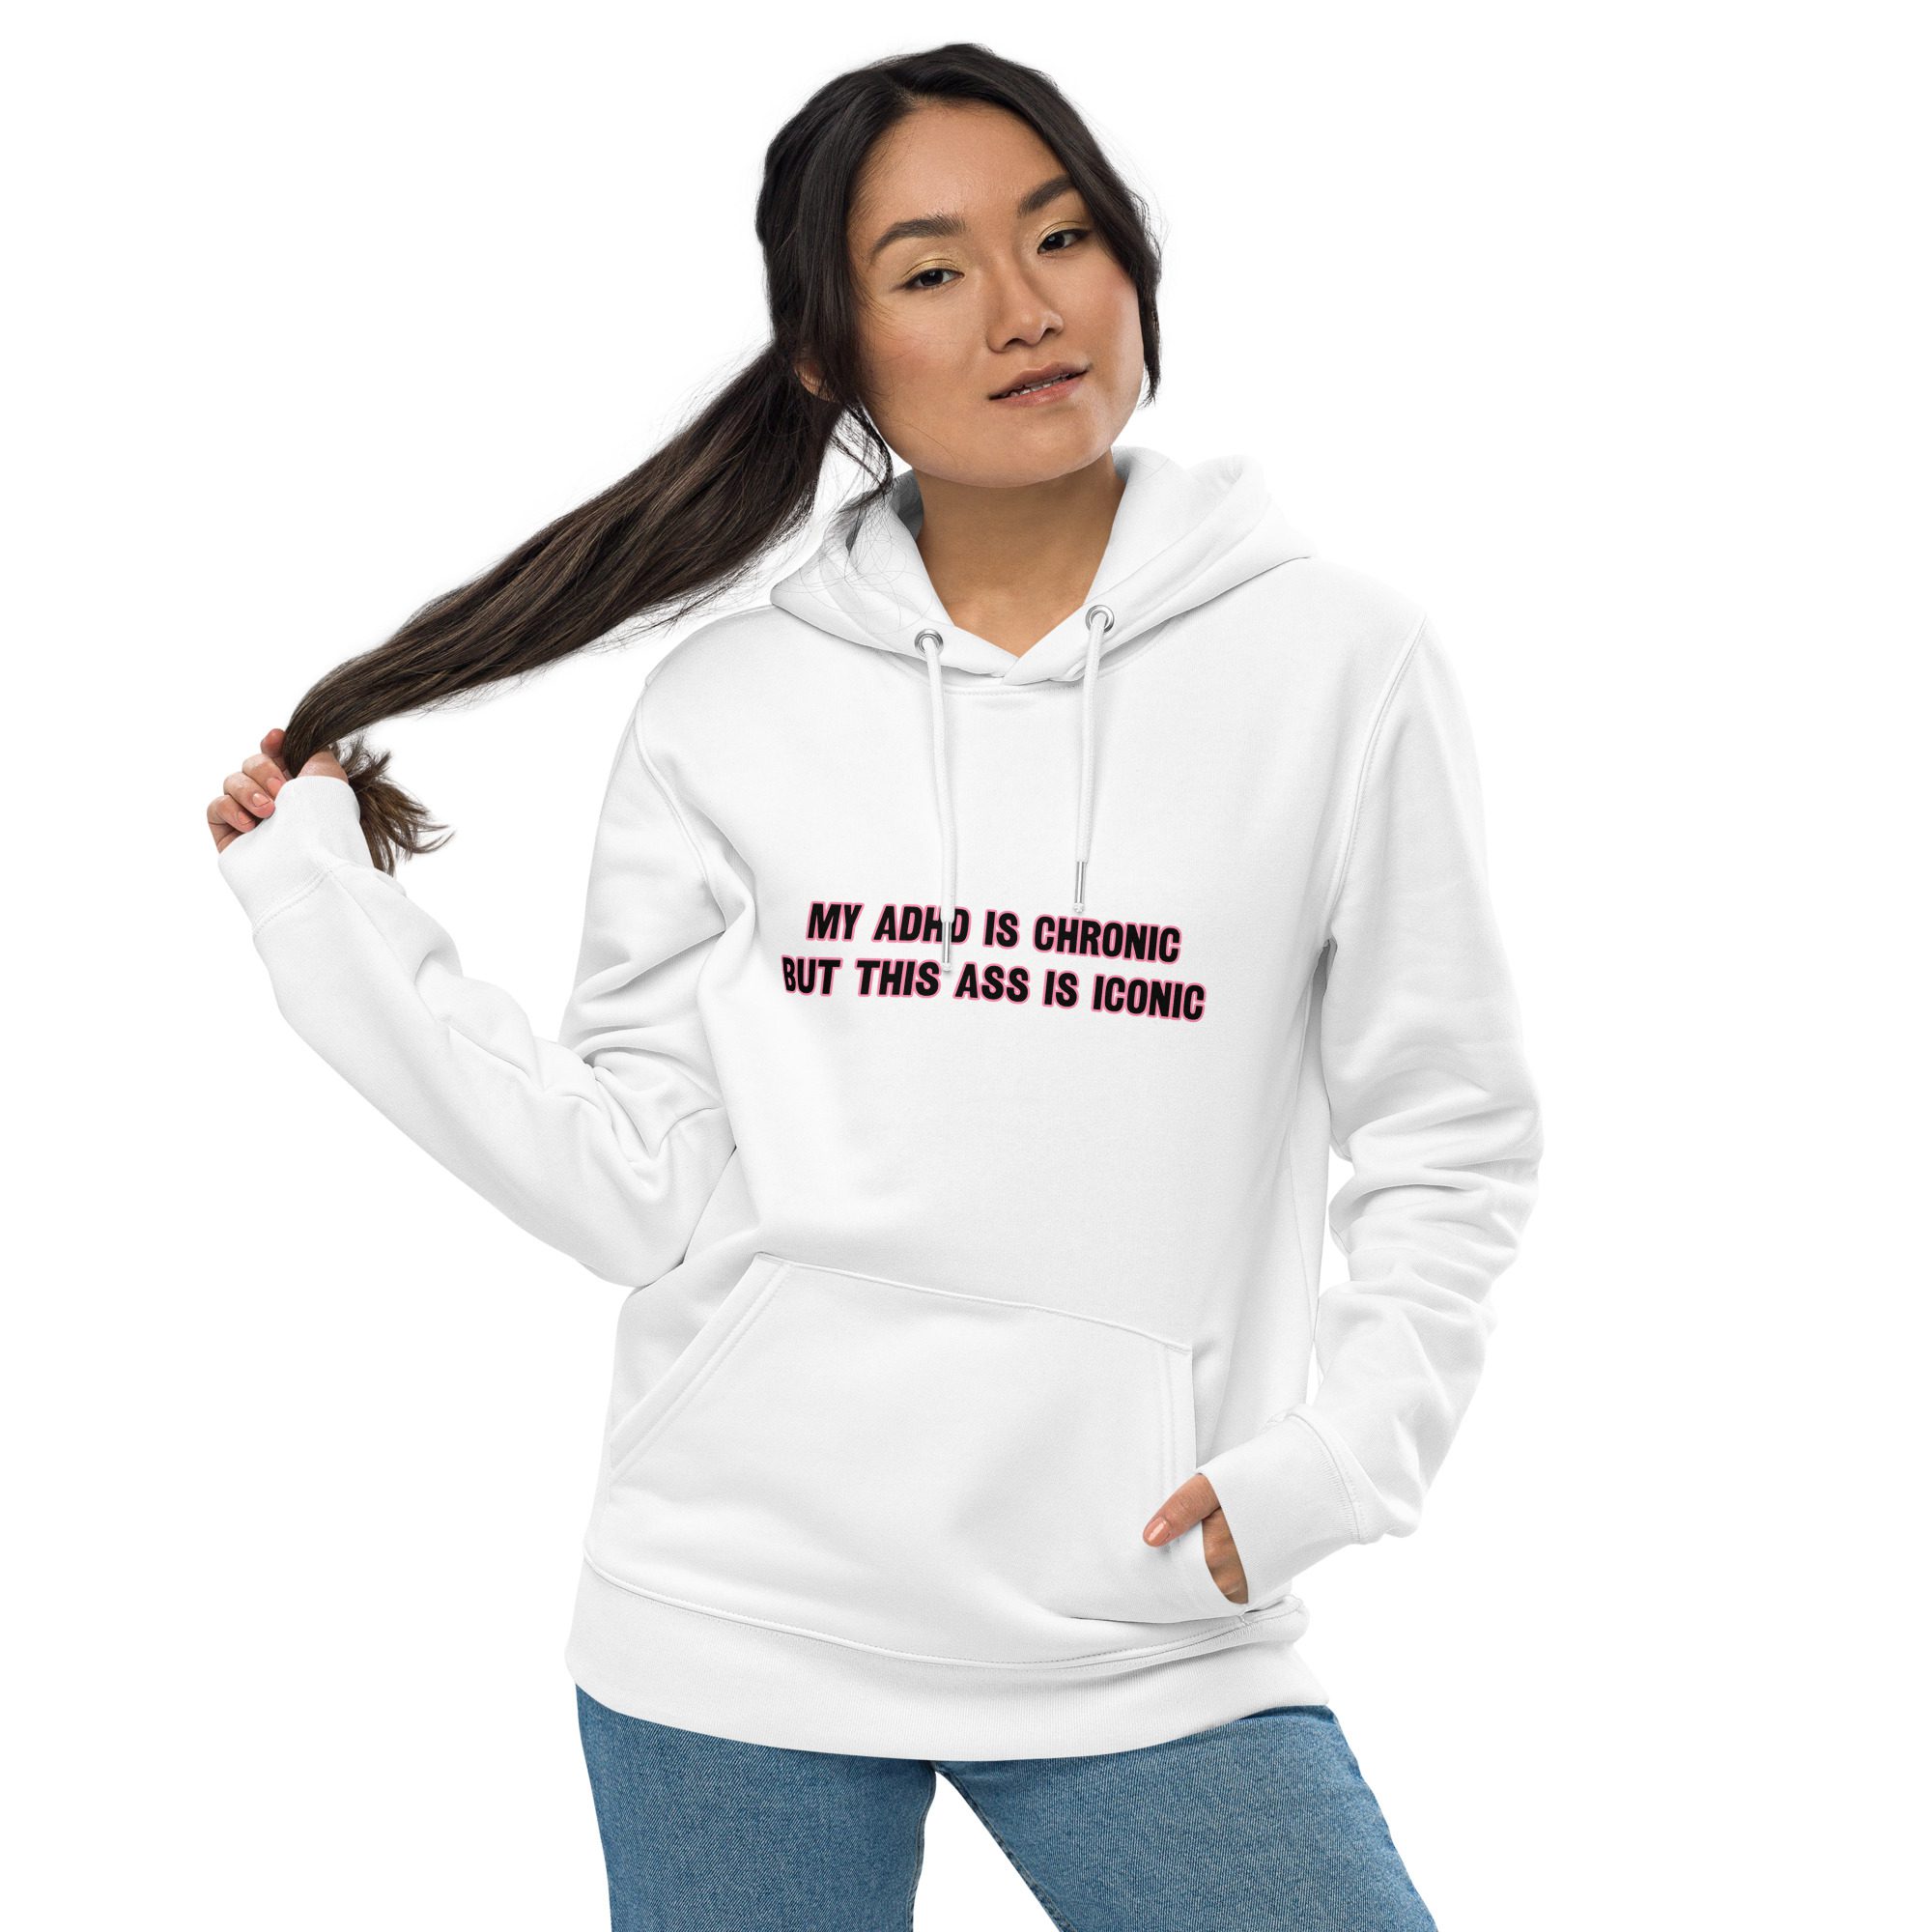 My ADHD Is Chronic But This Ass Is Iconic Unisex Eco Hoodie